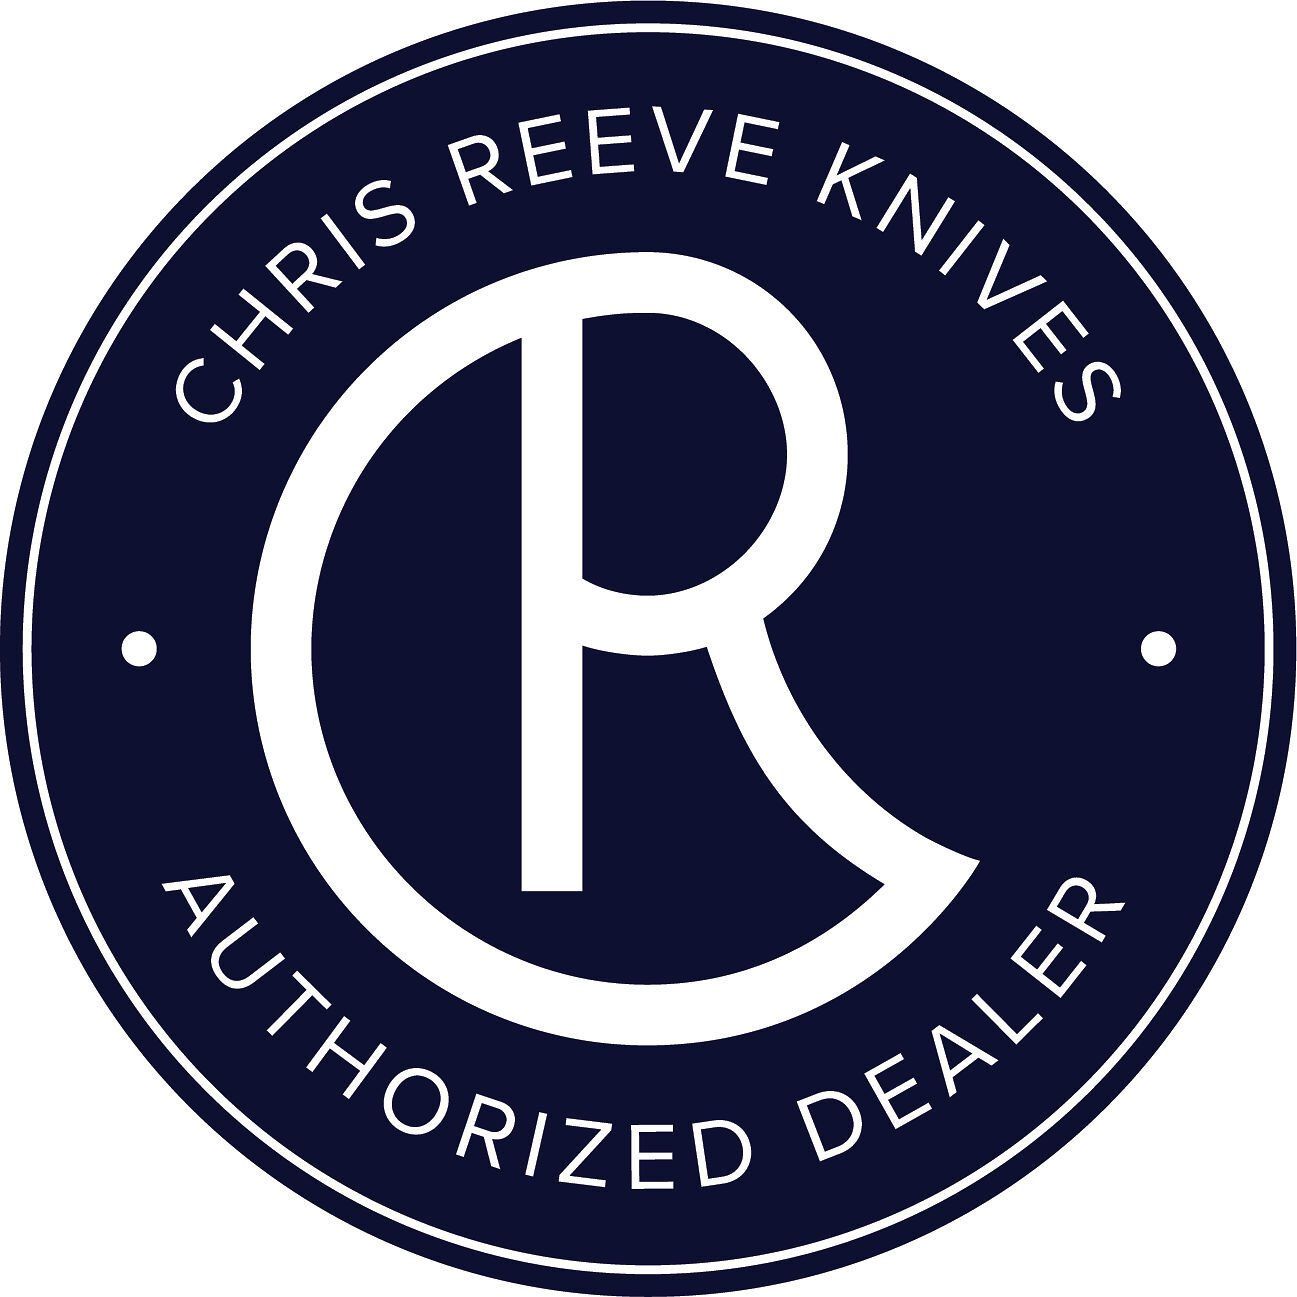 Authorised Dealer of Chris Reeve Knives